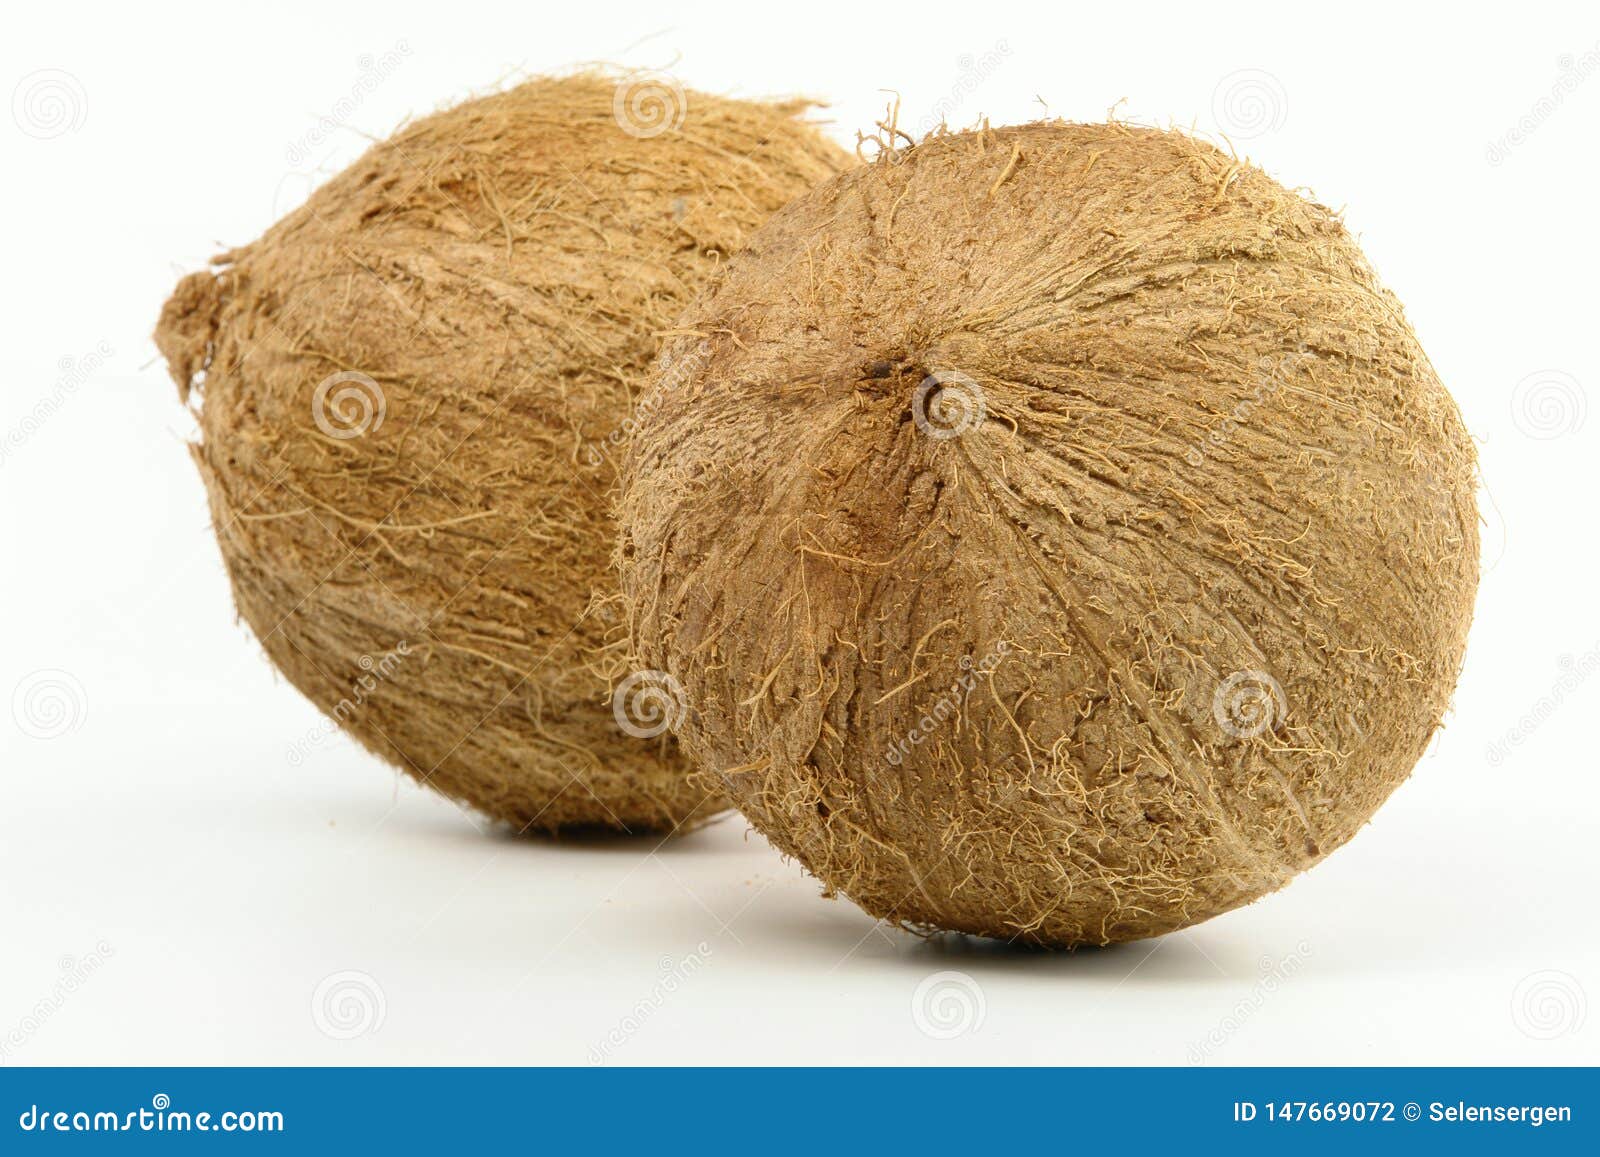 Double Coconut Lodoicea Maldivica From Seychelles. This Palm Tree Gives ...